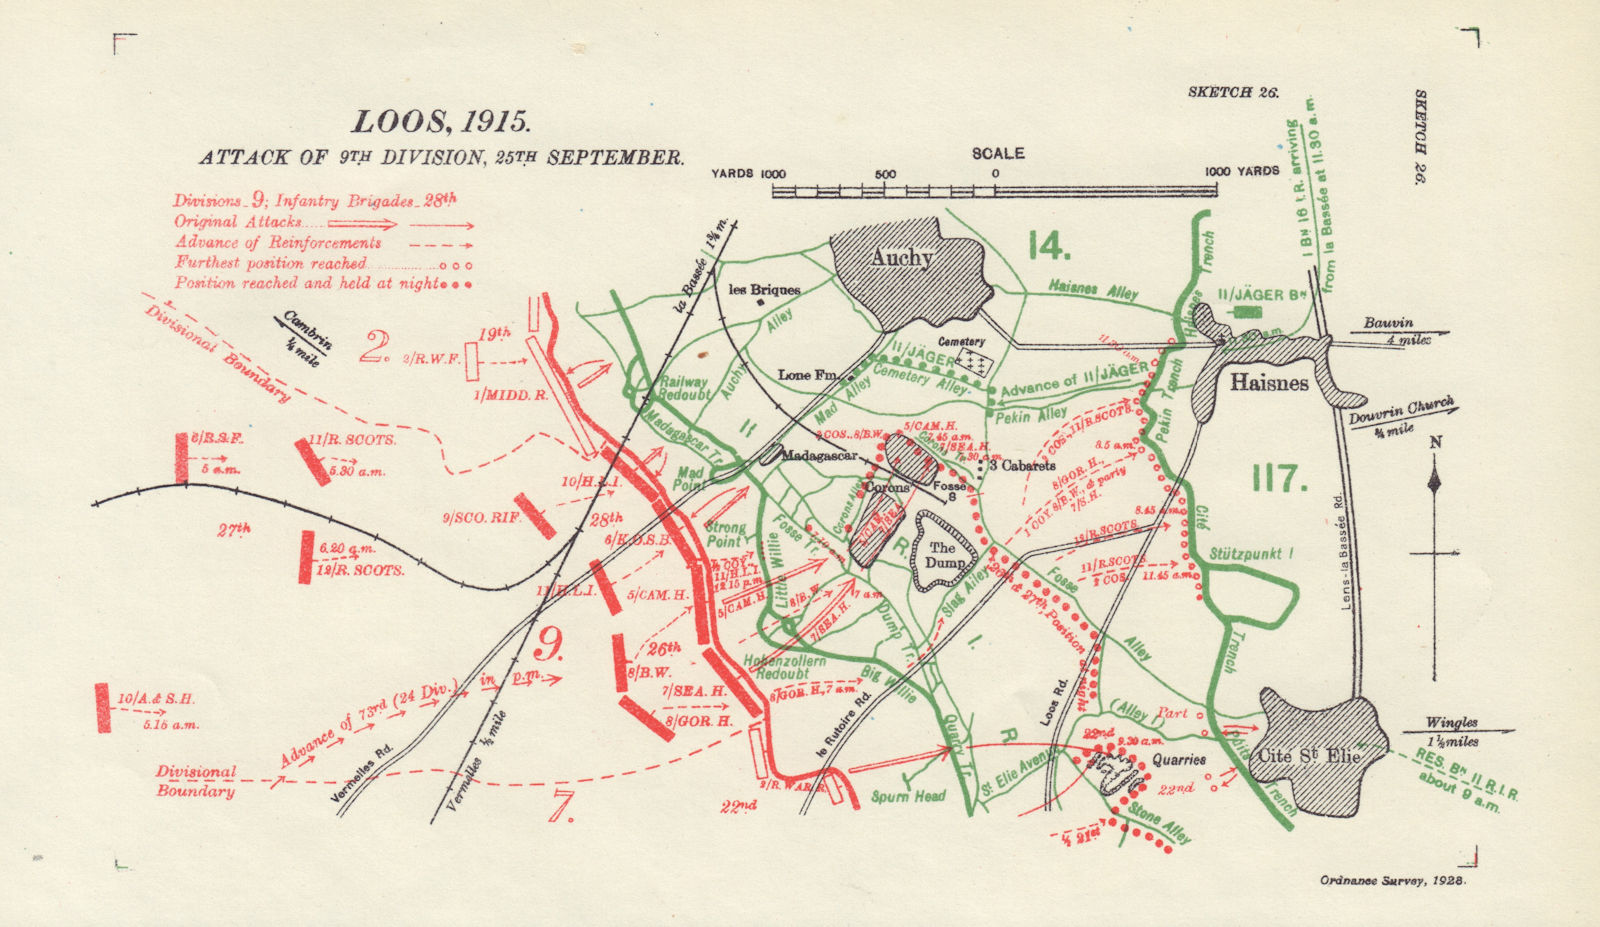 Battle of Loos, 9th Division attack, 25th September 1915. WW1. Trenches 1928 map